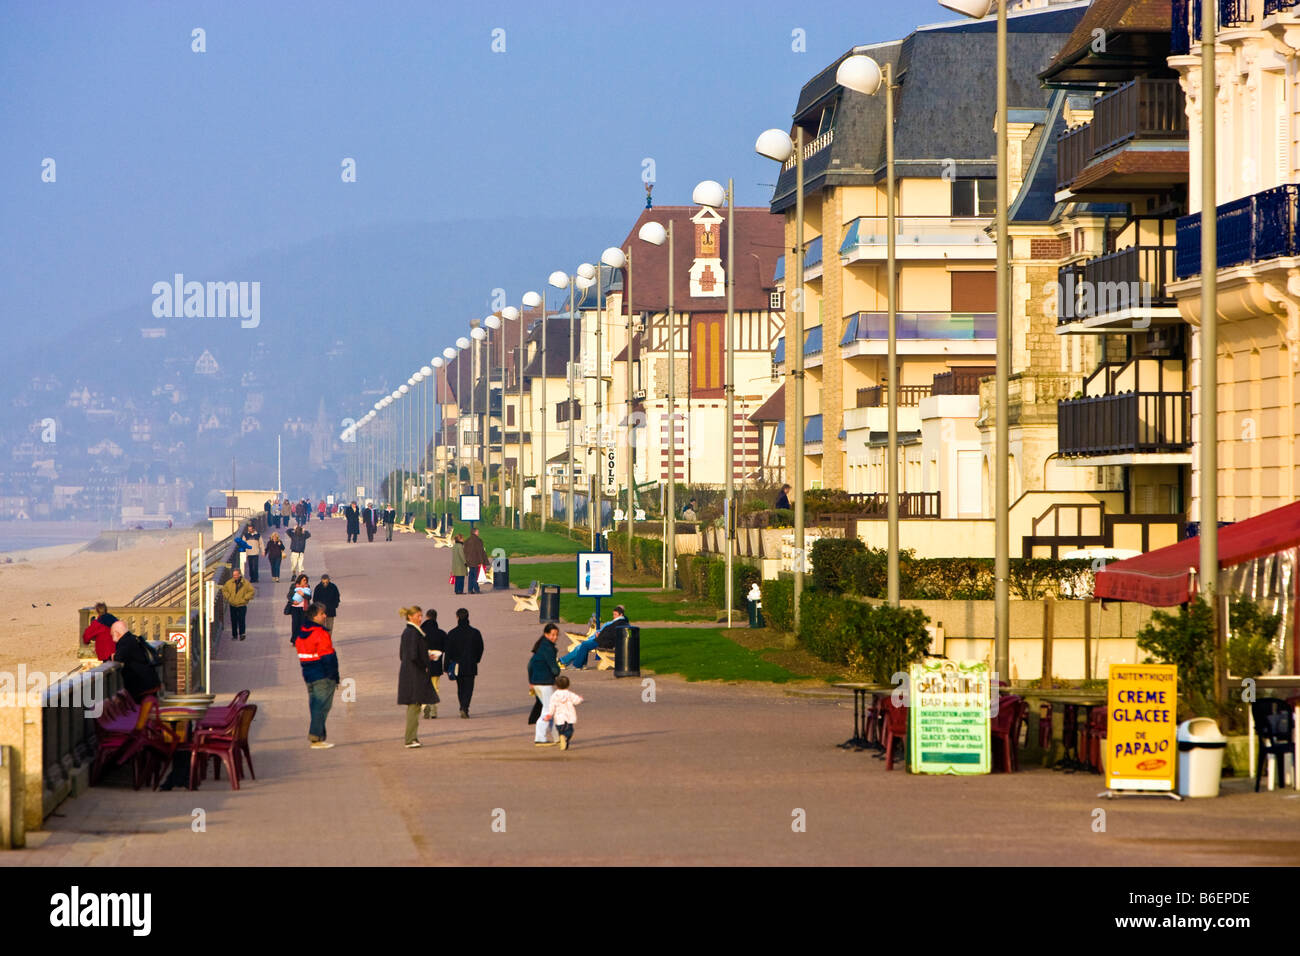 Cabourg, Normandy, France - Sea mist on the Promenade Marcel Proust Stock Photo